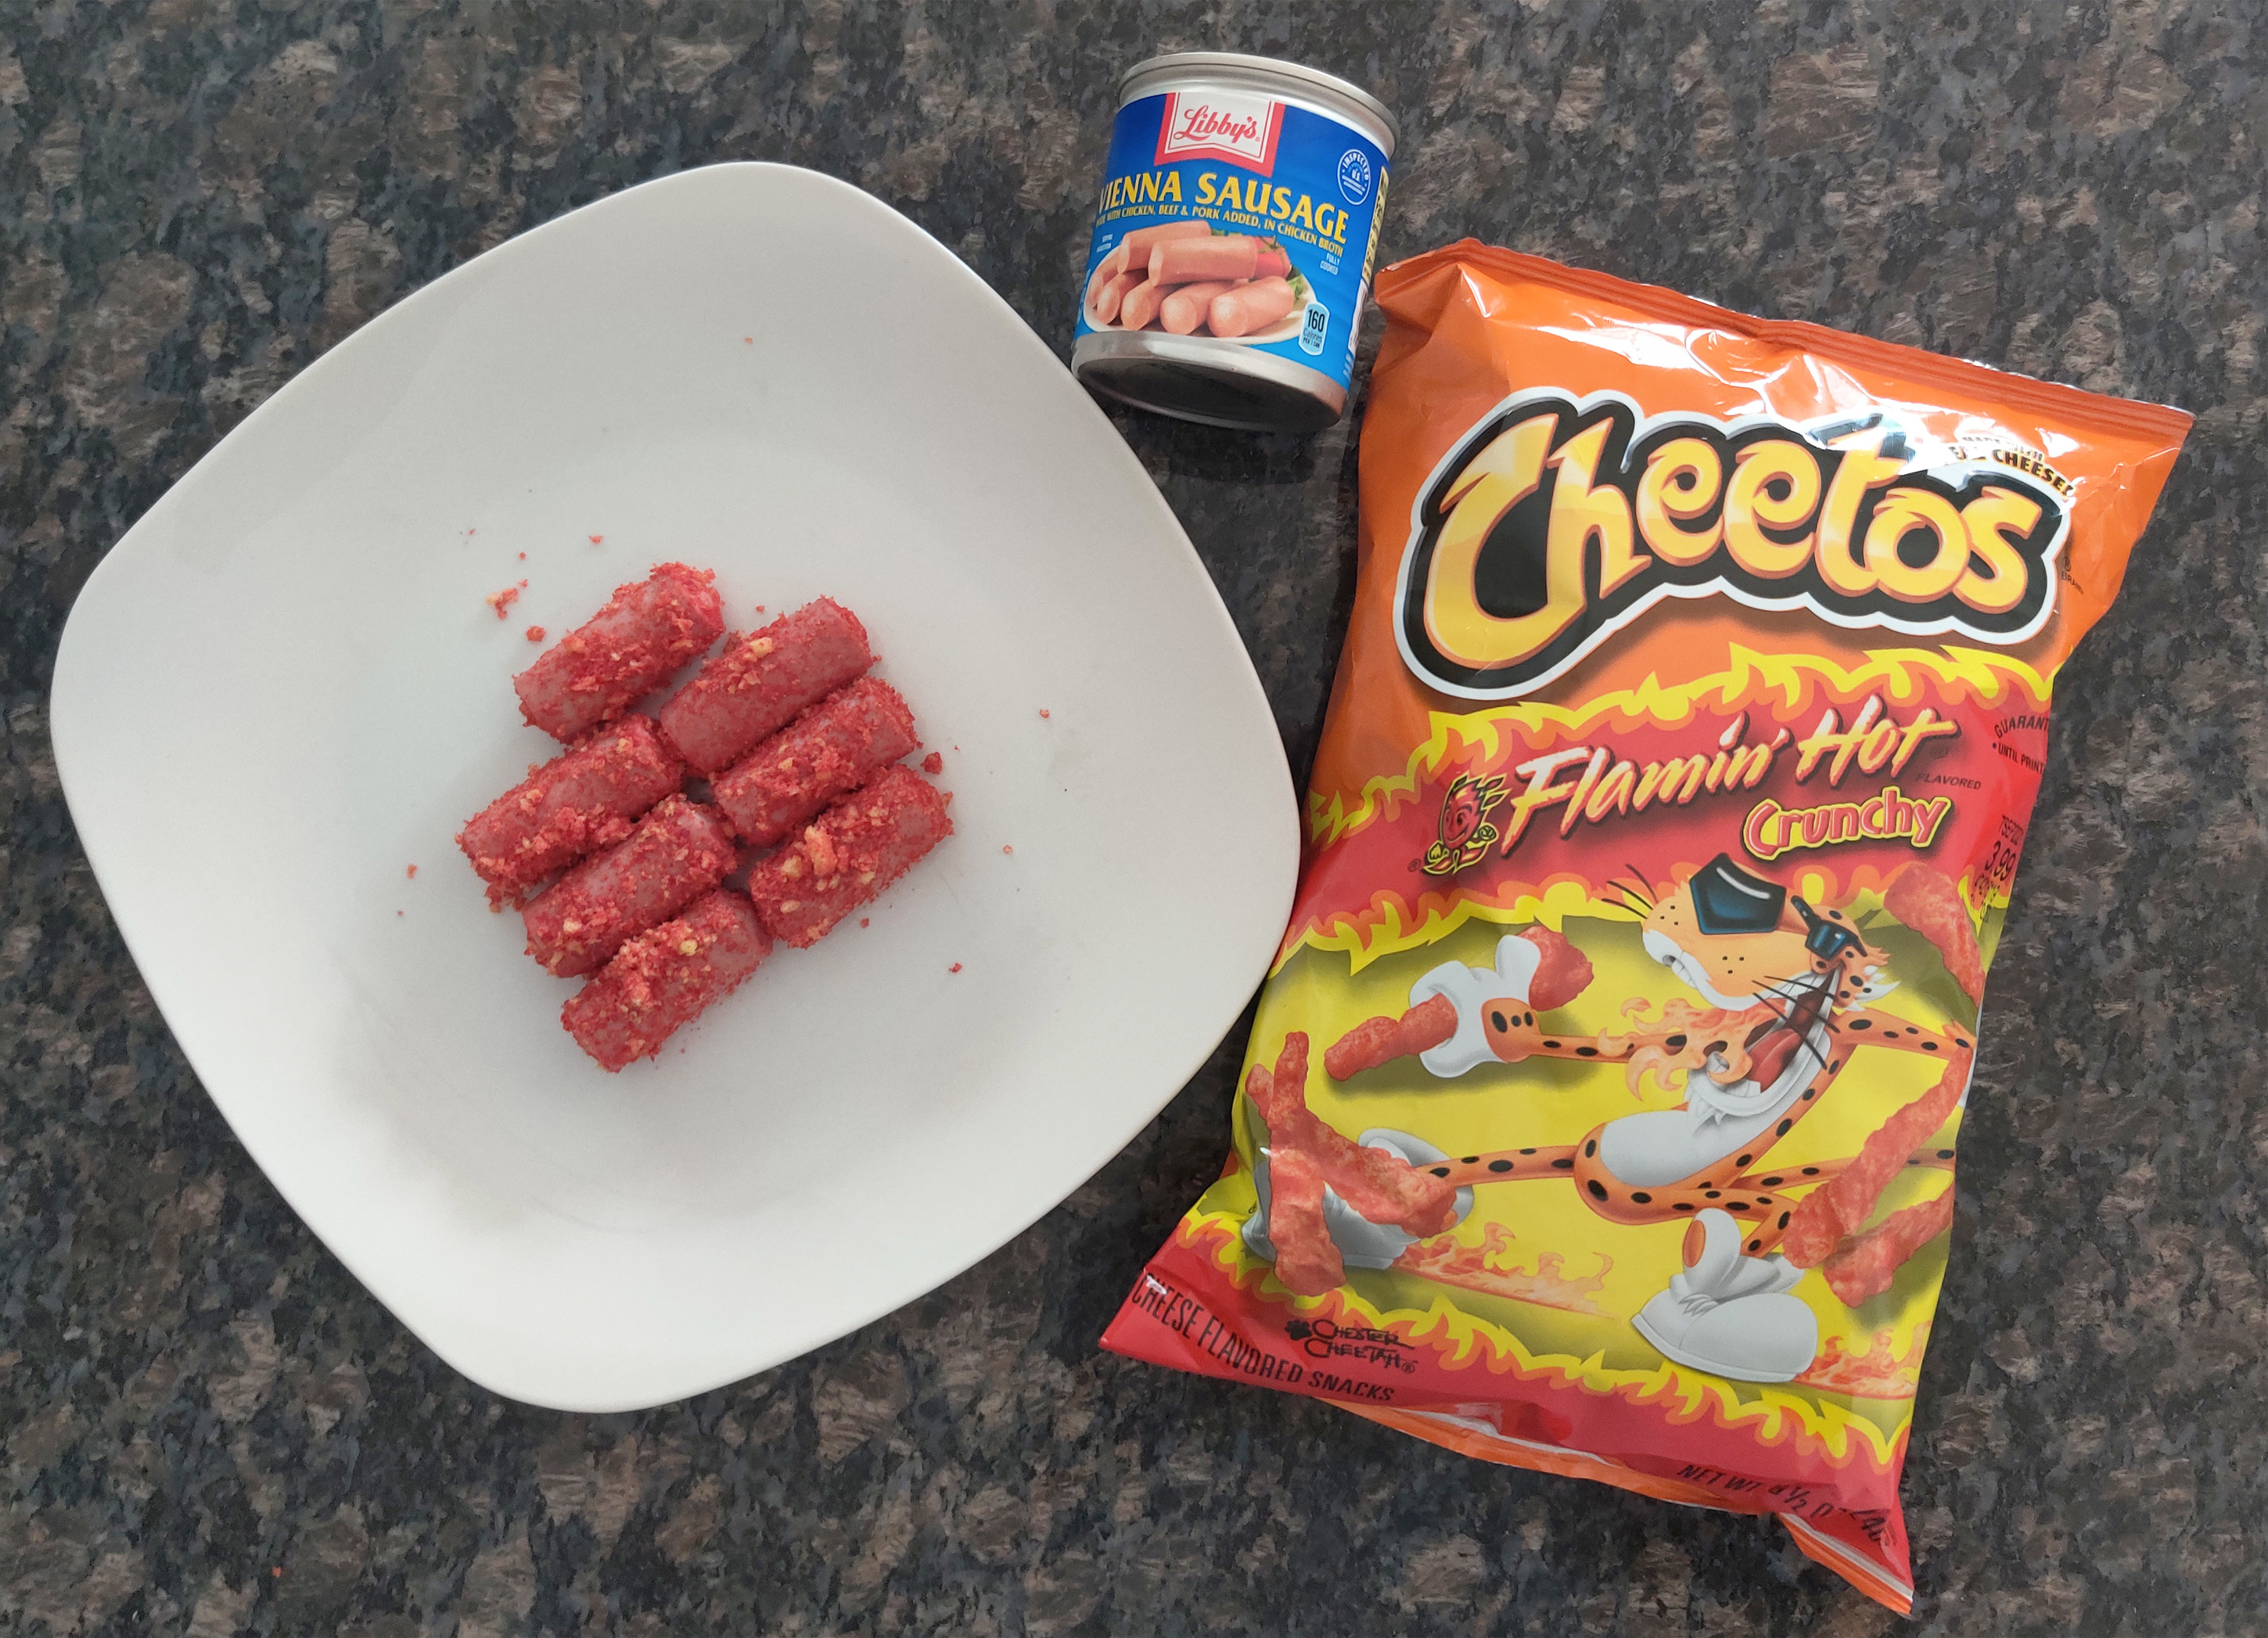 The full display of the recipe: Hot Cheetos, Vienna sausage, and a plate of the Cheeto-covered sausages